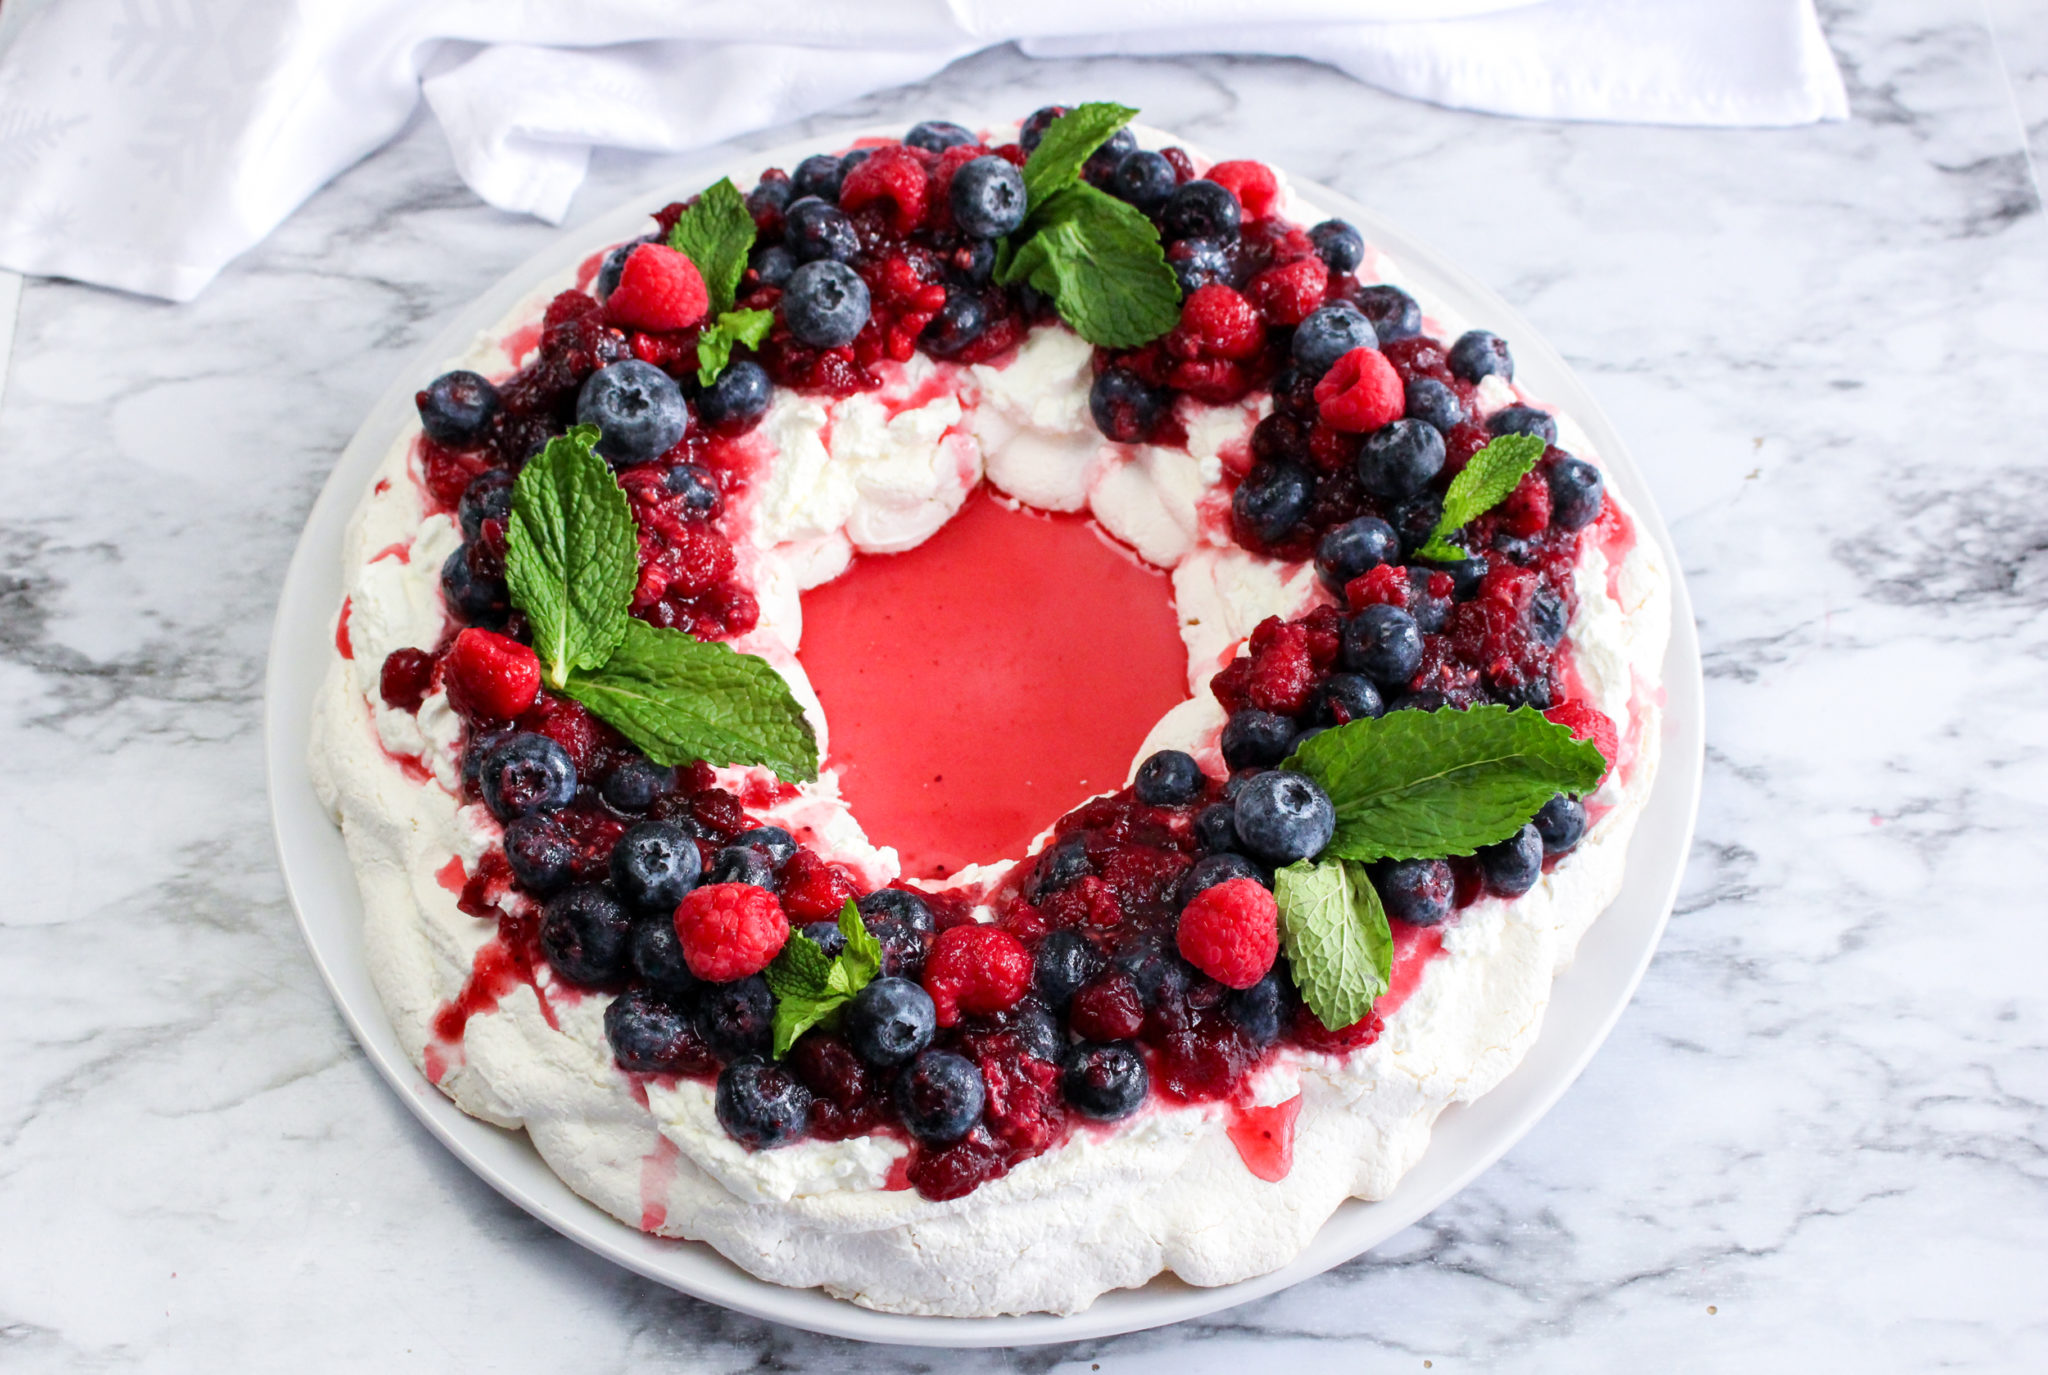 This delicious holiday meringue wreath is a great addition to any Christmas table. The raspberries and blueberries add so much color and flavor!